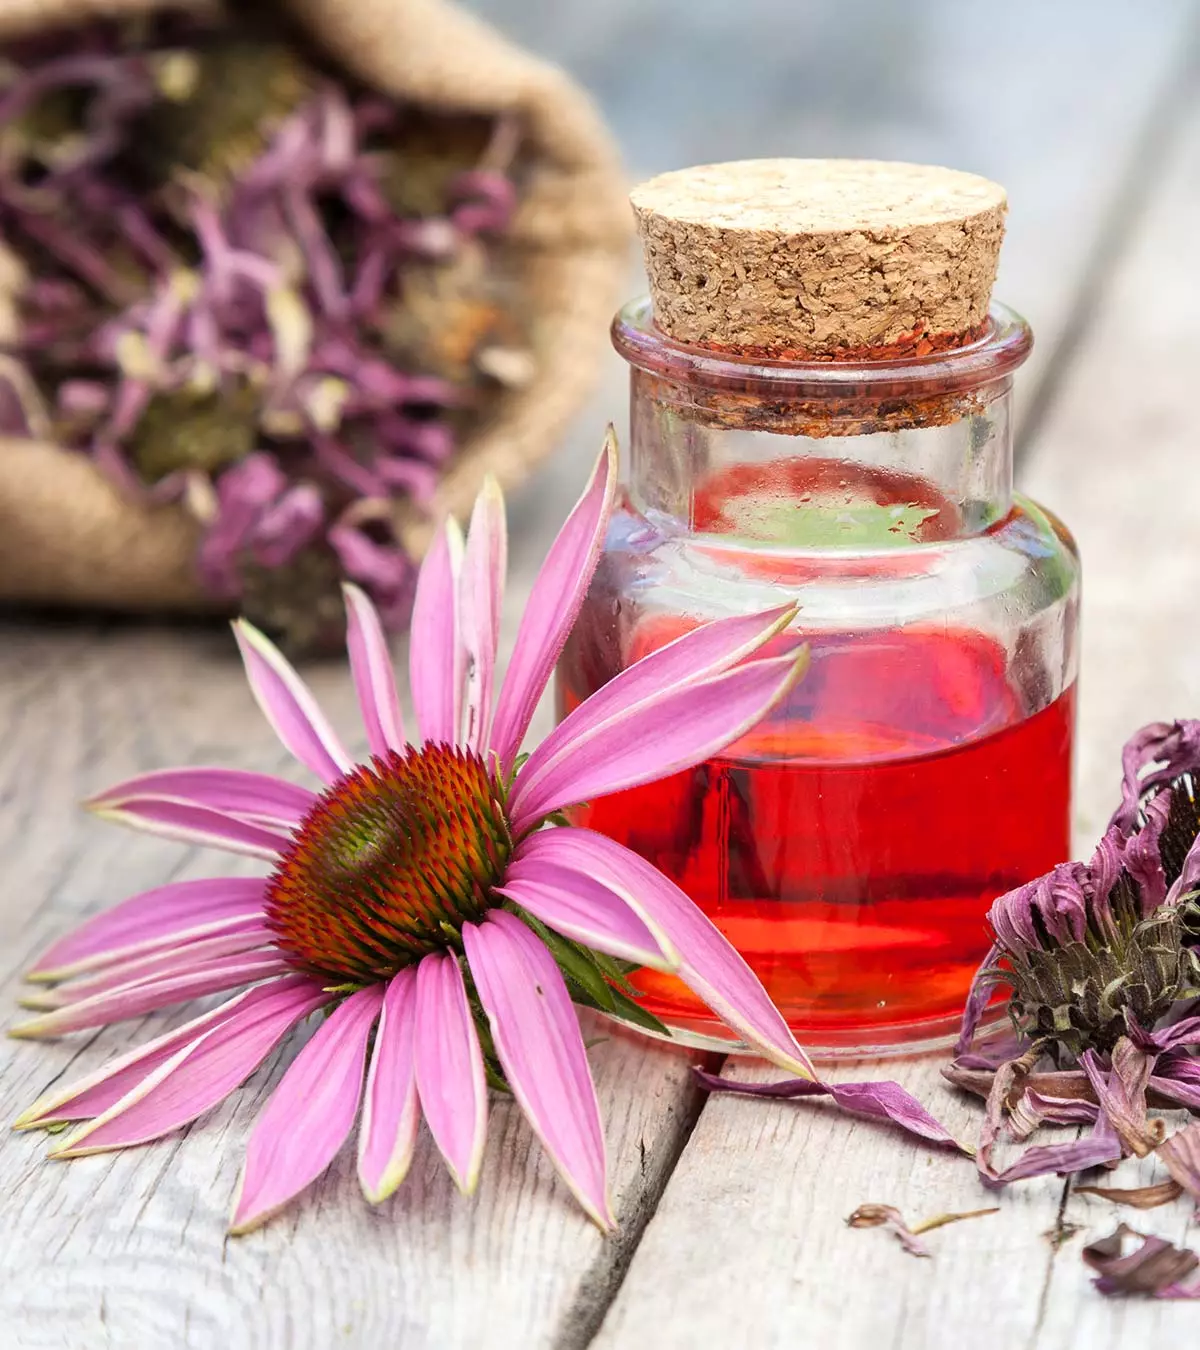 Echinacea When Breastfeeding Safety, Benefits, And Side Effects Banner